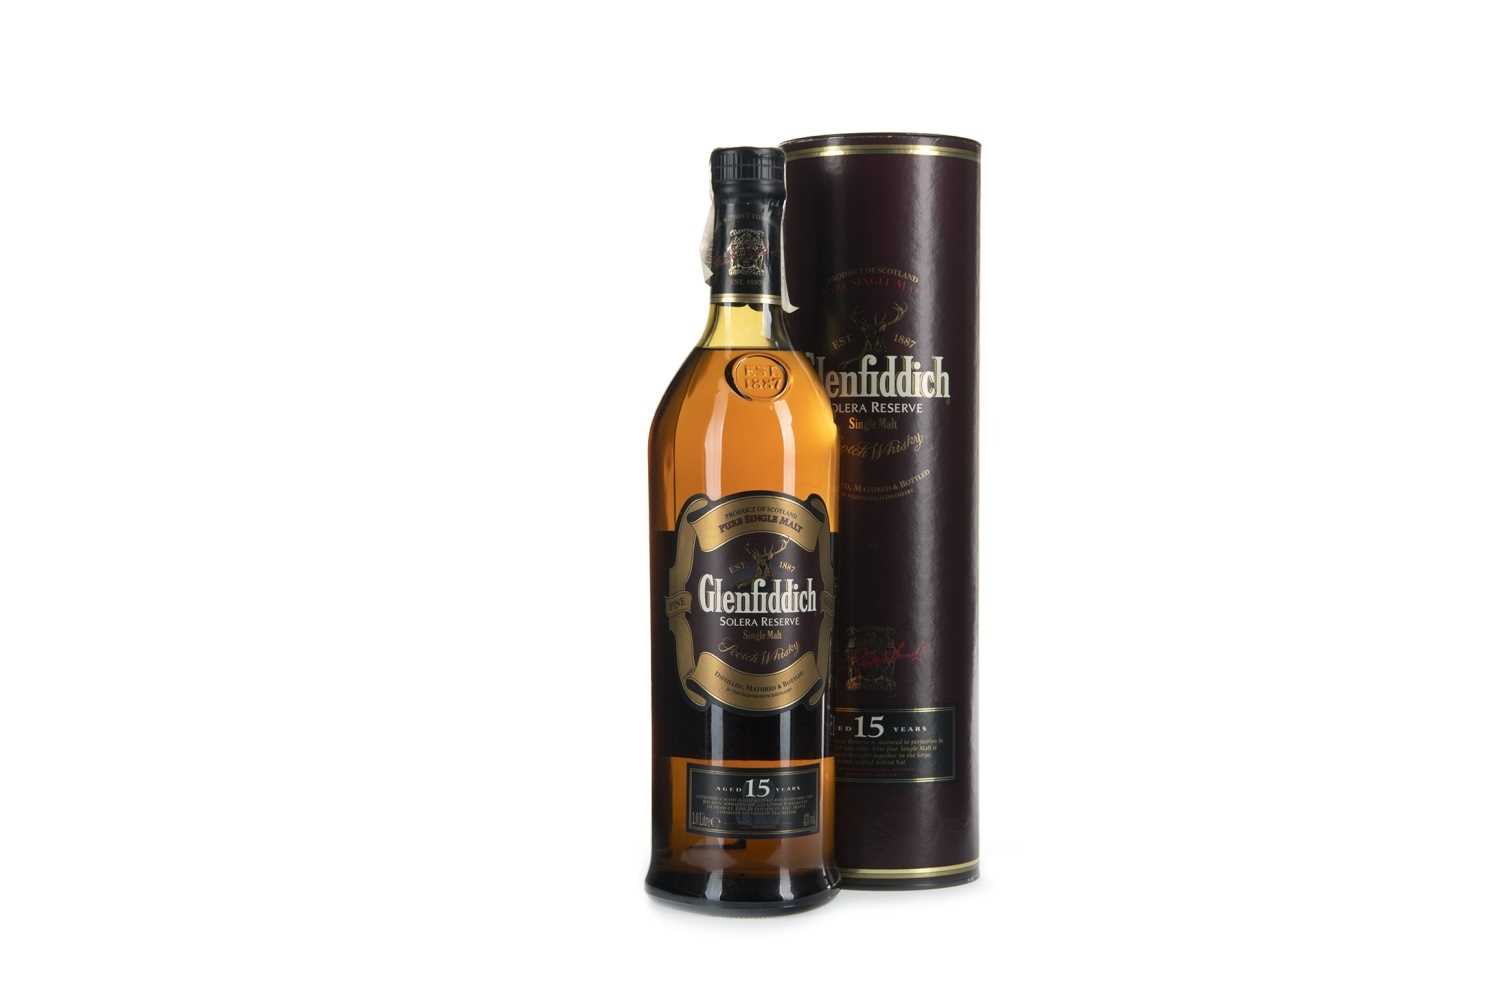 Lot 254 - GLENFIDDICH SOLORA RESERVE AGED 15 YEARS - ONE LITRE